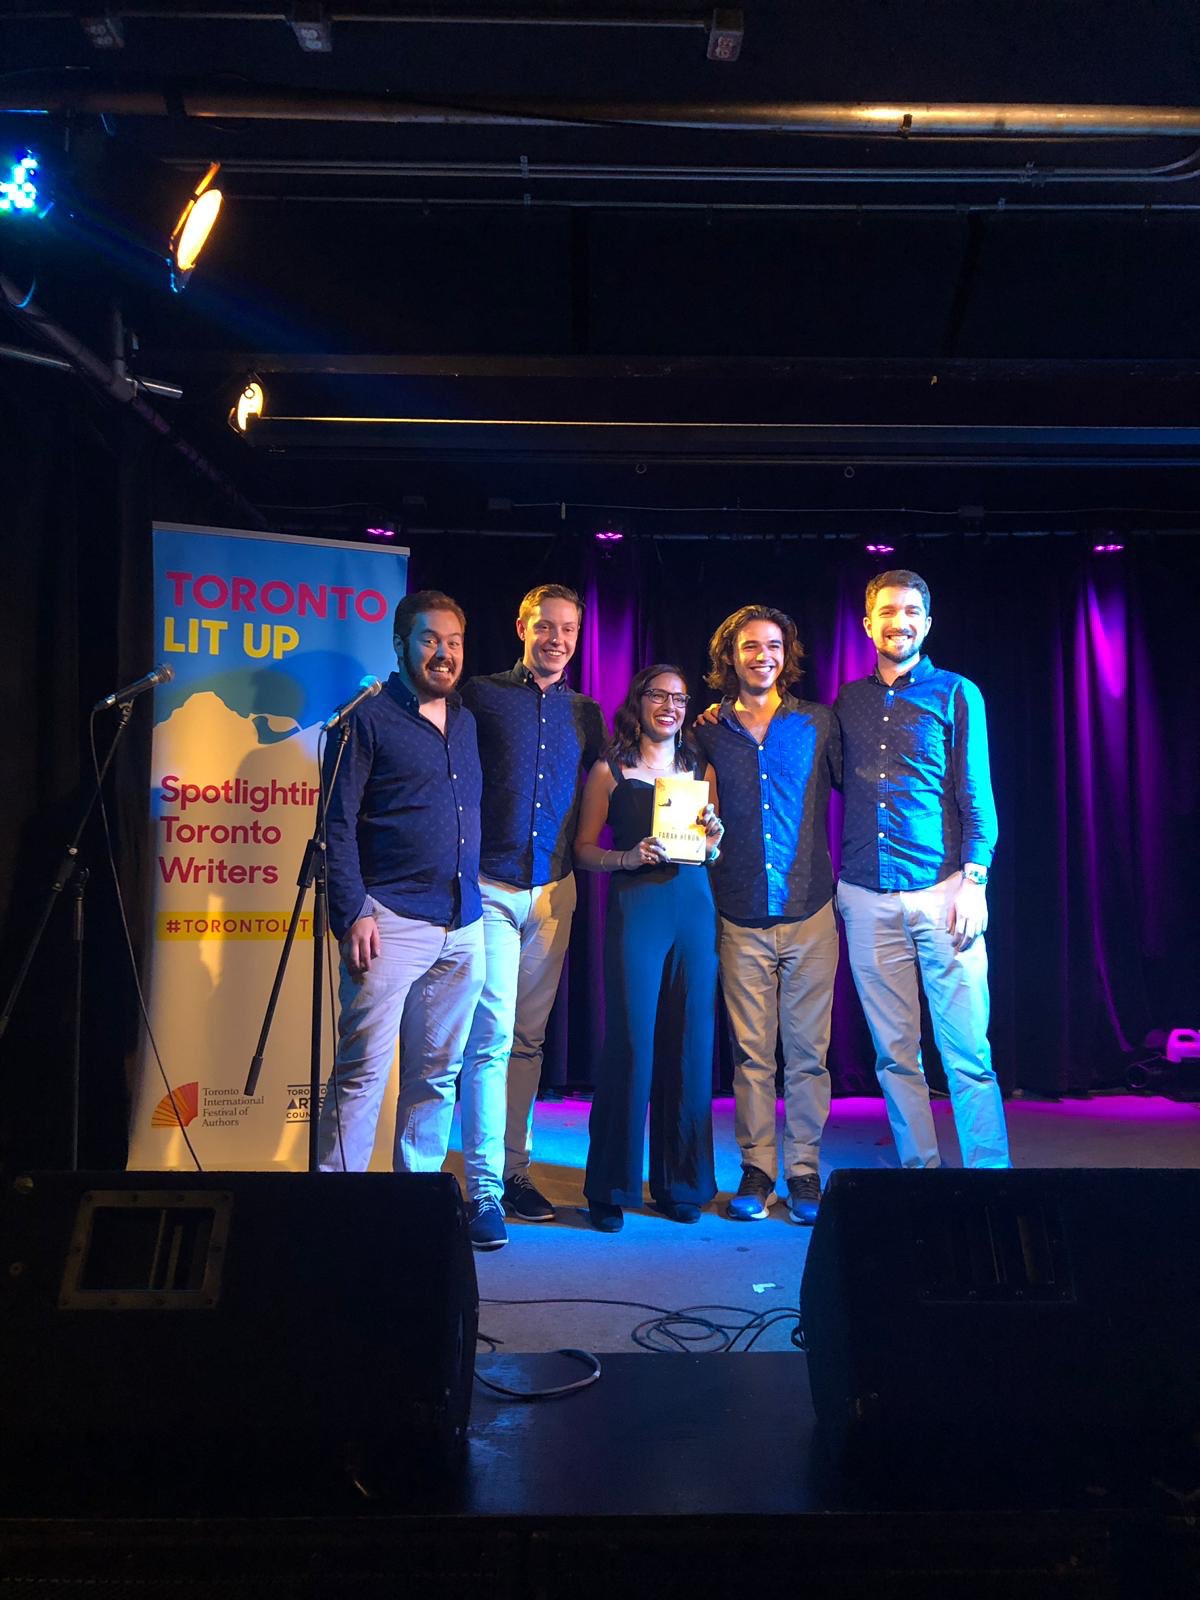 Farah Heron stands on stage with members of a barbershop quartet. Farah is holding up a copy of her book and a Toronto Lit Up banner stands behind them.